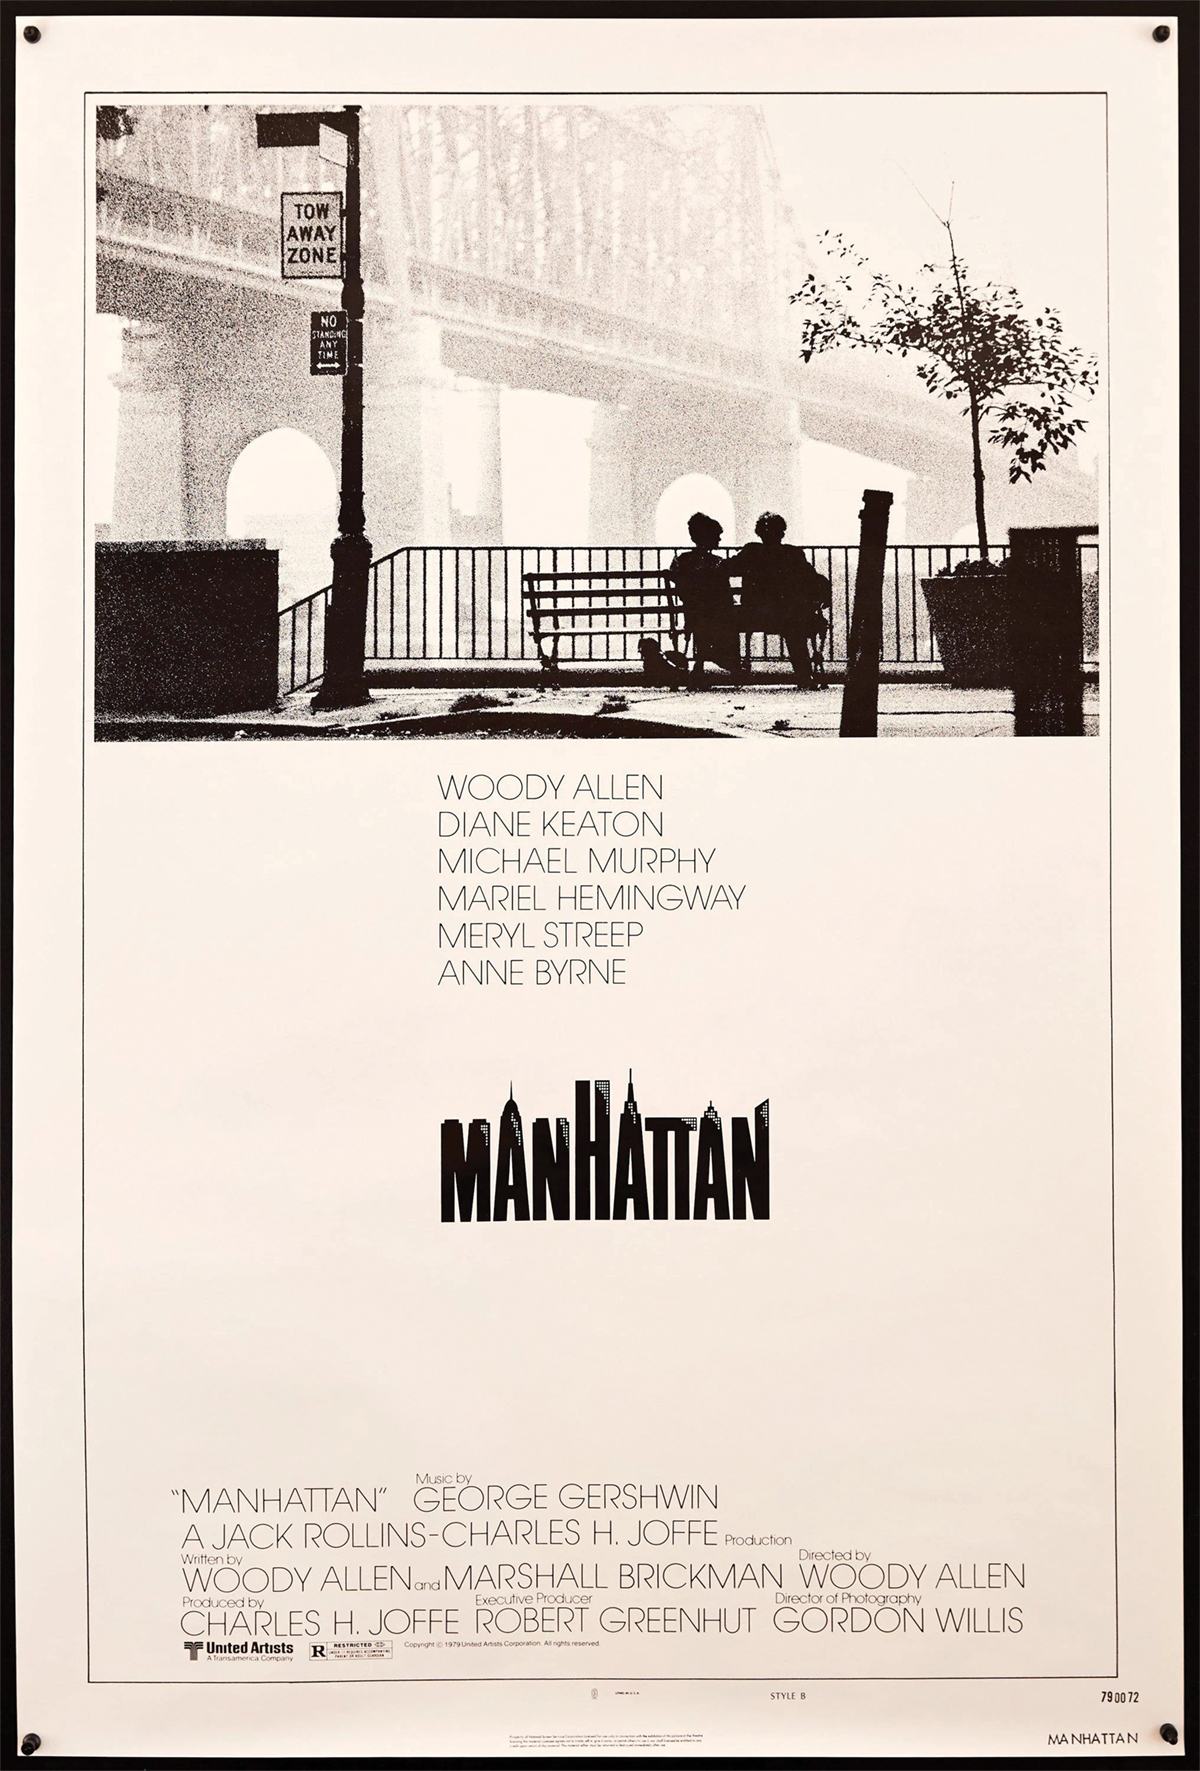 A movie poster of a movie 'Manhattan' of a silhouette of a couple sitting on a bench by the river.